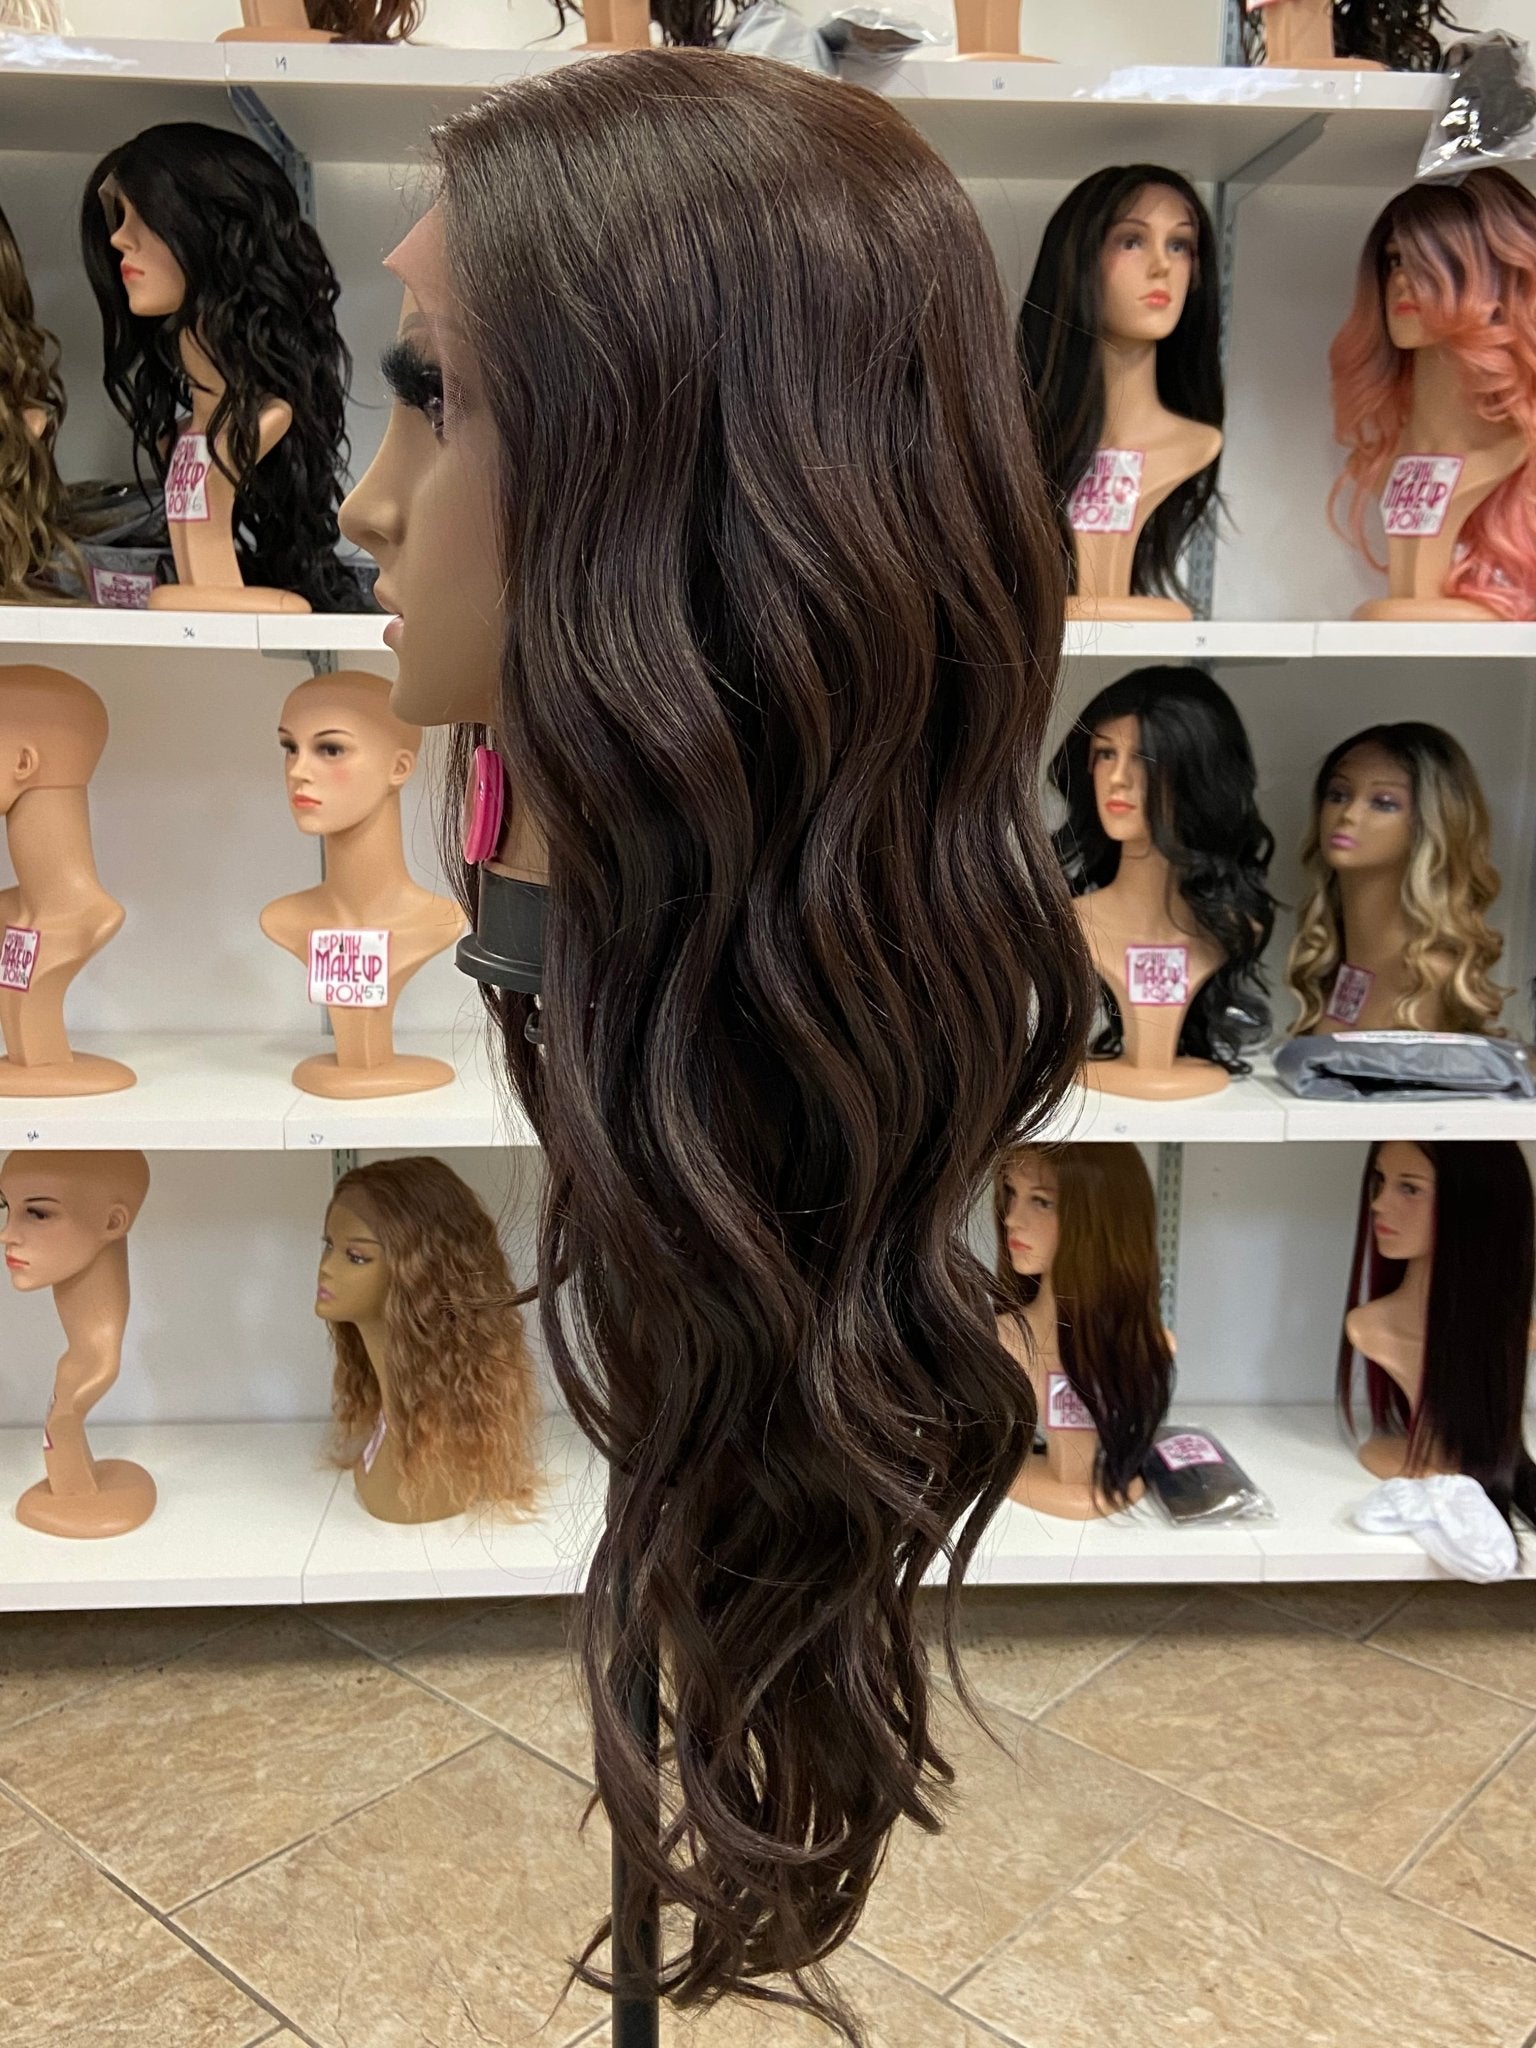 239 Nadia - Middle Part Lace Front Wig Human Hair Blend- 4 - DaizyKat Cosmetics 239 Nadia - Middle Part Lace Front Wig Human Hair Blend- 4 DaizyKat Cosmetics